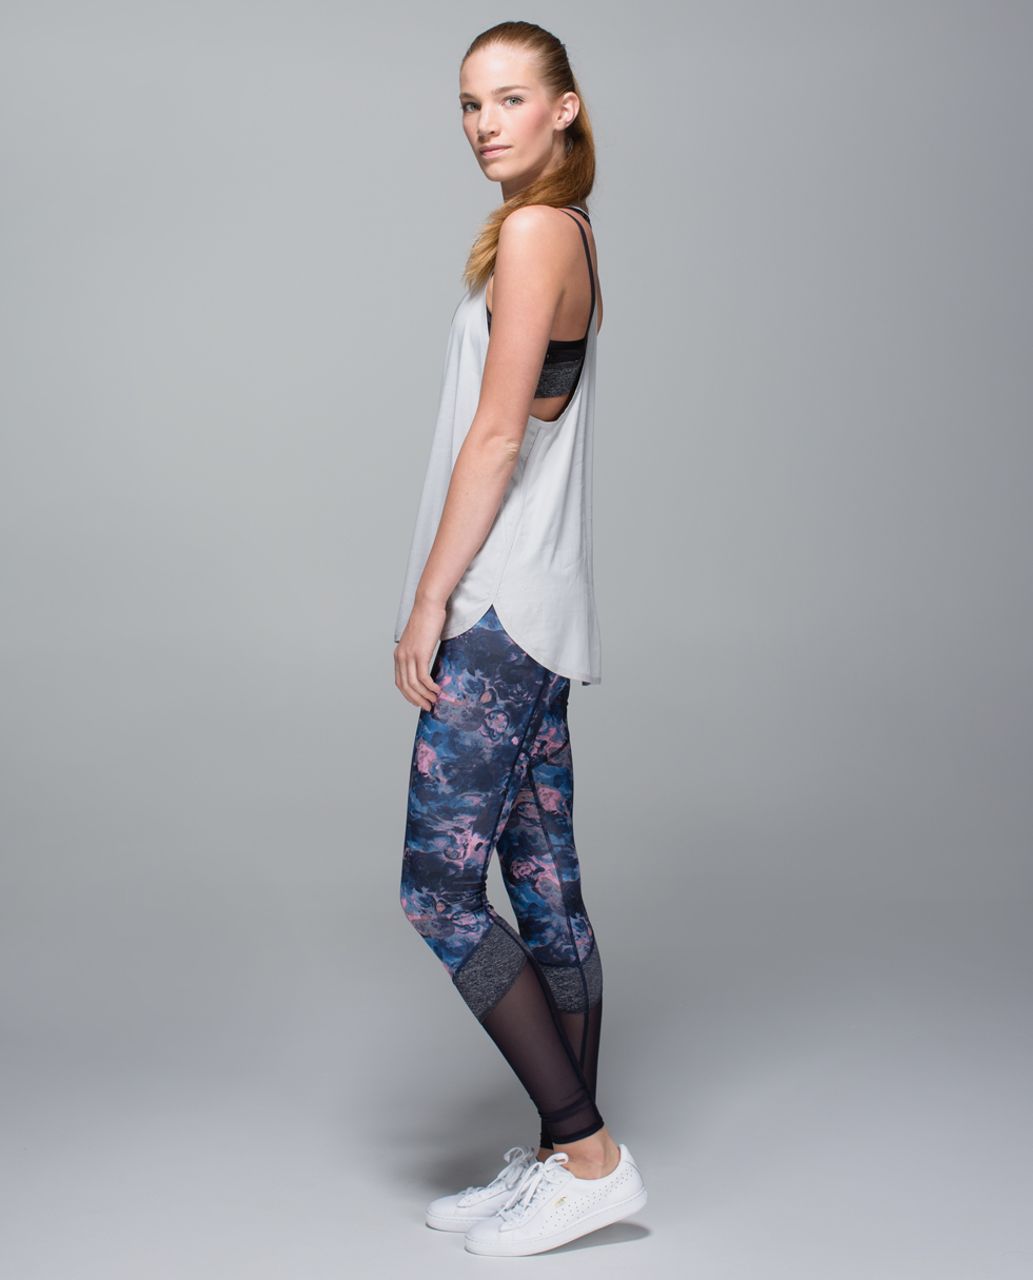 Lululemon If You're Lucky Pant *Full-On Luxtreme - Moody Mirage Bark Berry Deep Navy / Heathered Naval Blue / Naval Blue